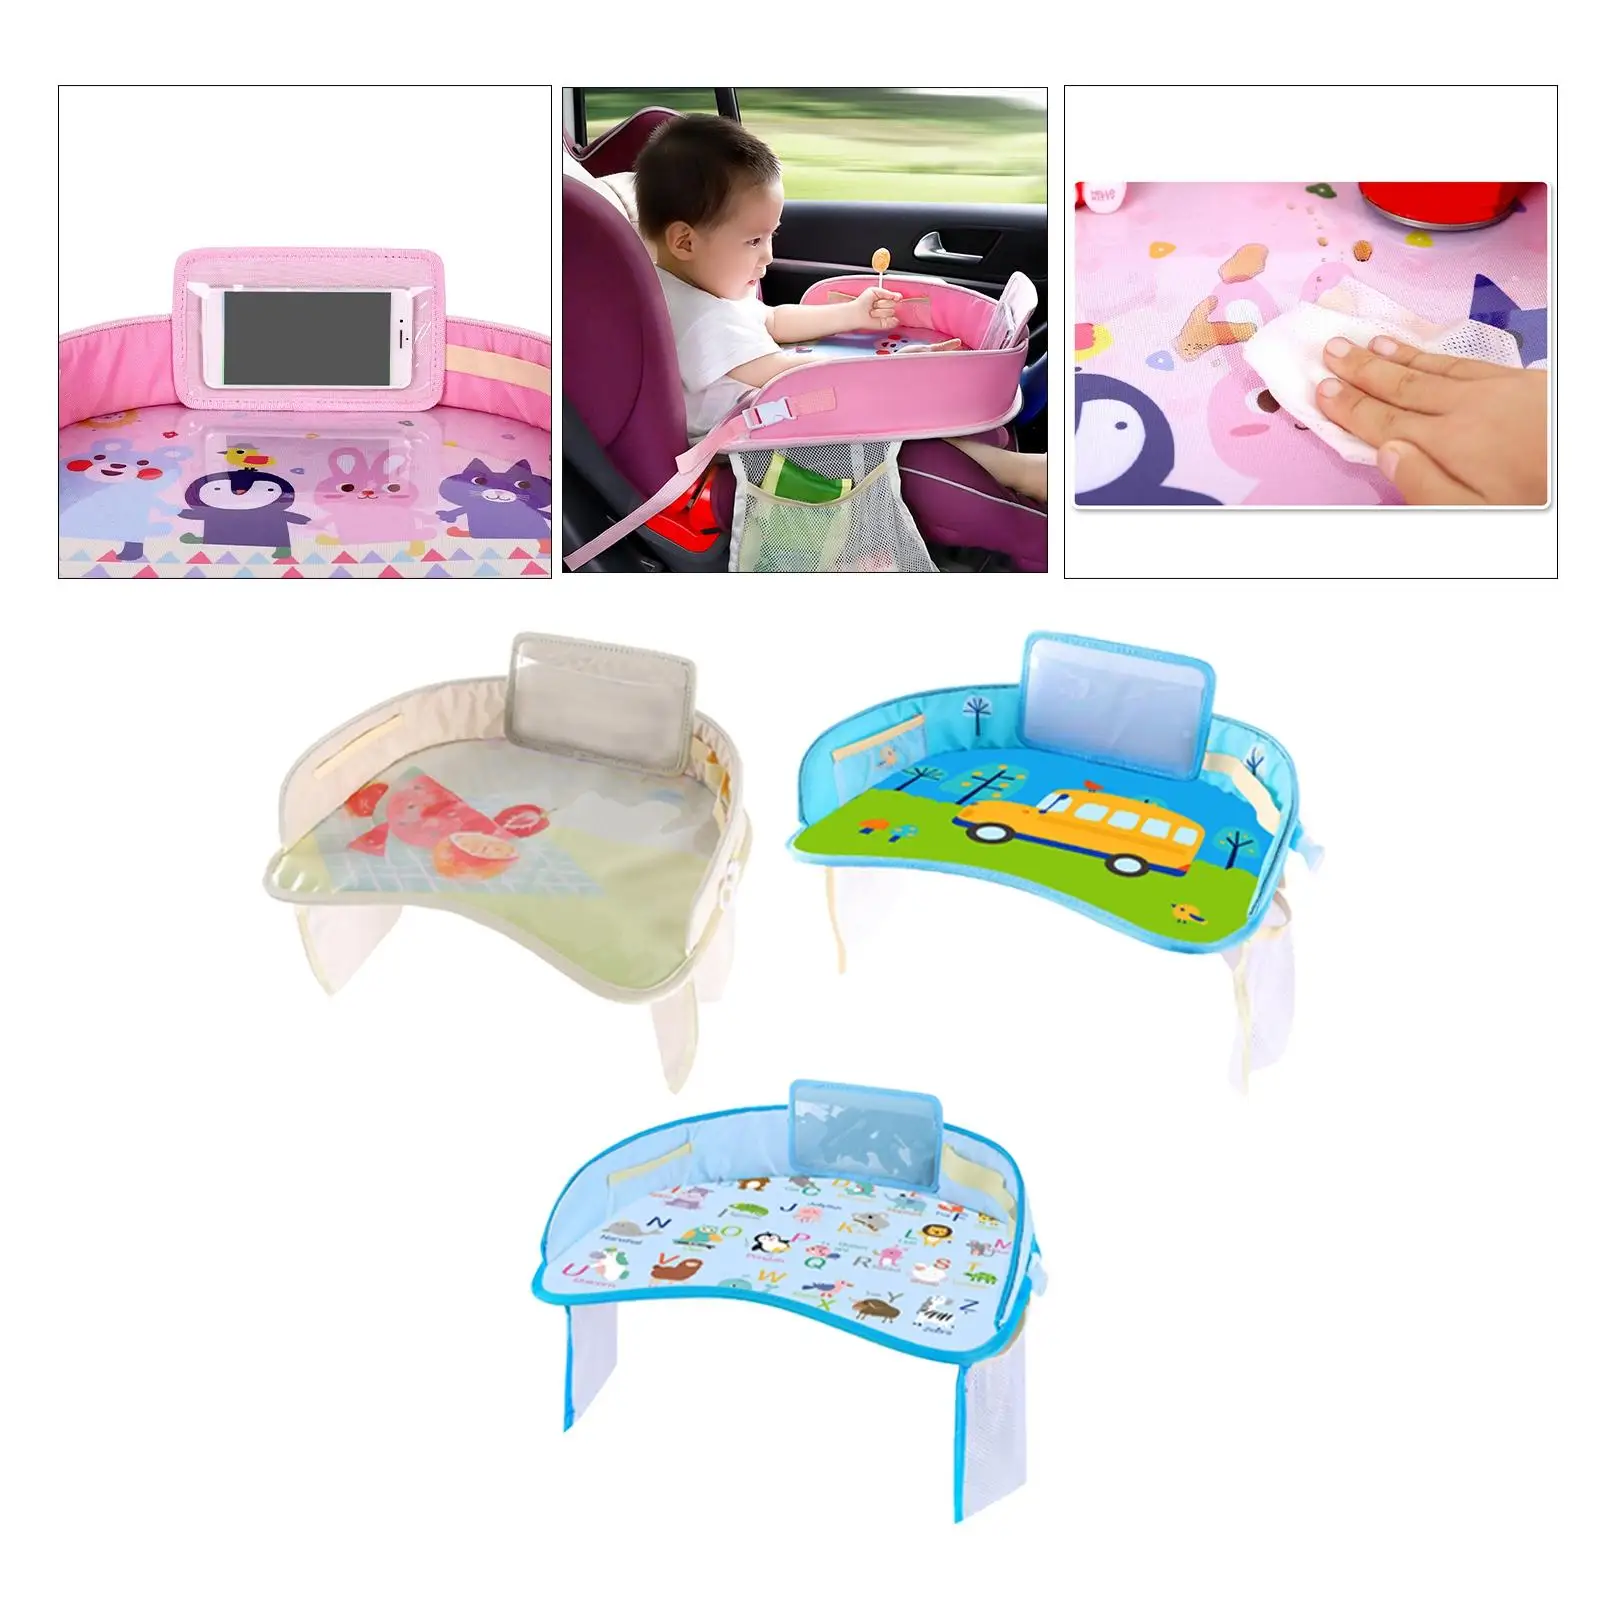 Toddler Lap Desk Organizer Eating Drawing Snack Tray Tablet Phone Holder Stand Kids Car Tray for Stroller Airplane Travel Kids